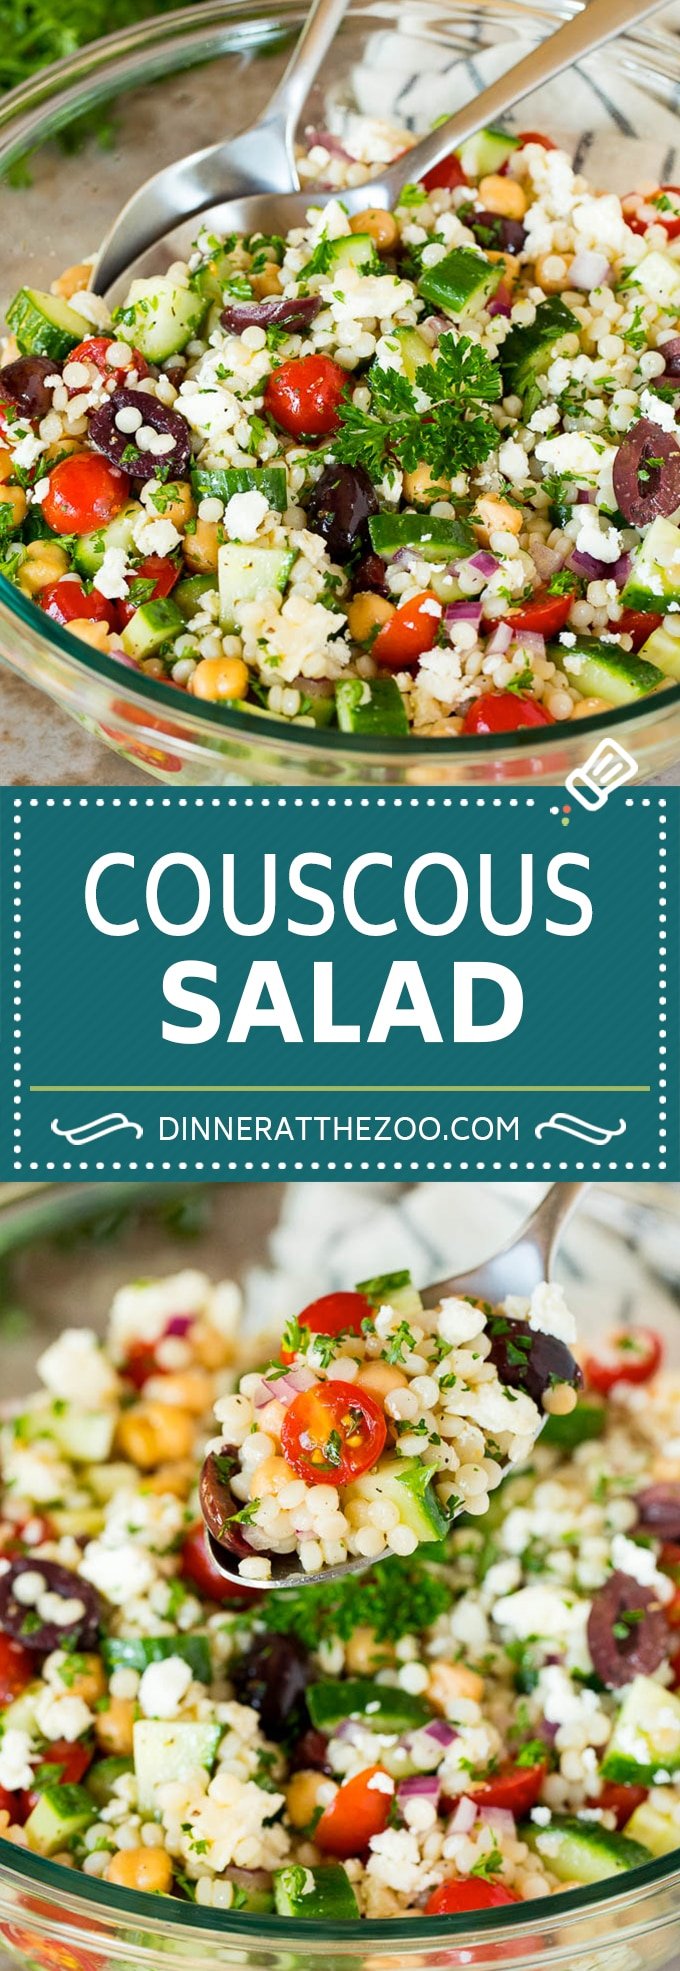 This Mediterranean couscous salad is pearl couscous with vegetables and feta cheese, all tossed in a homemade dressing.